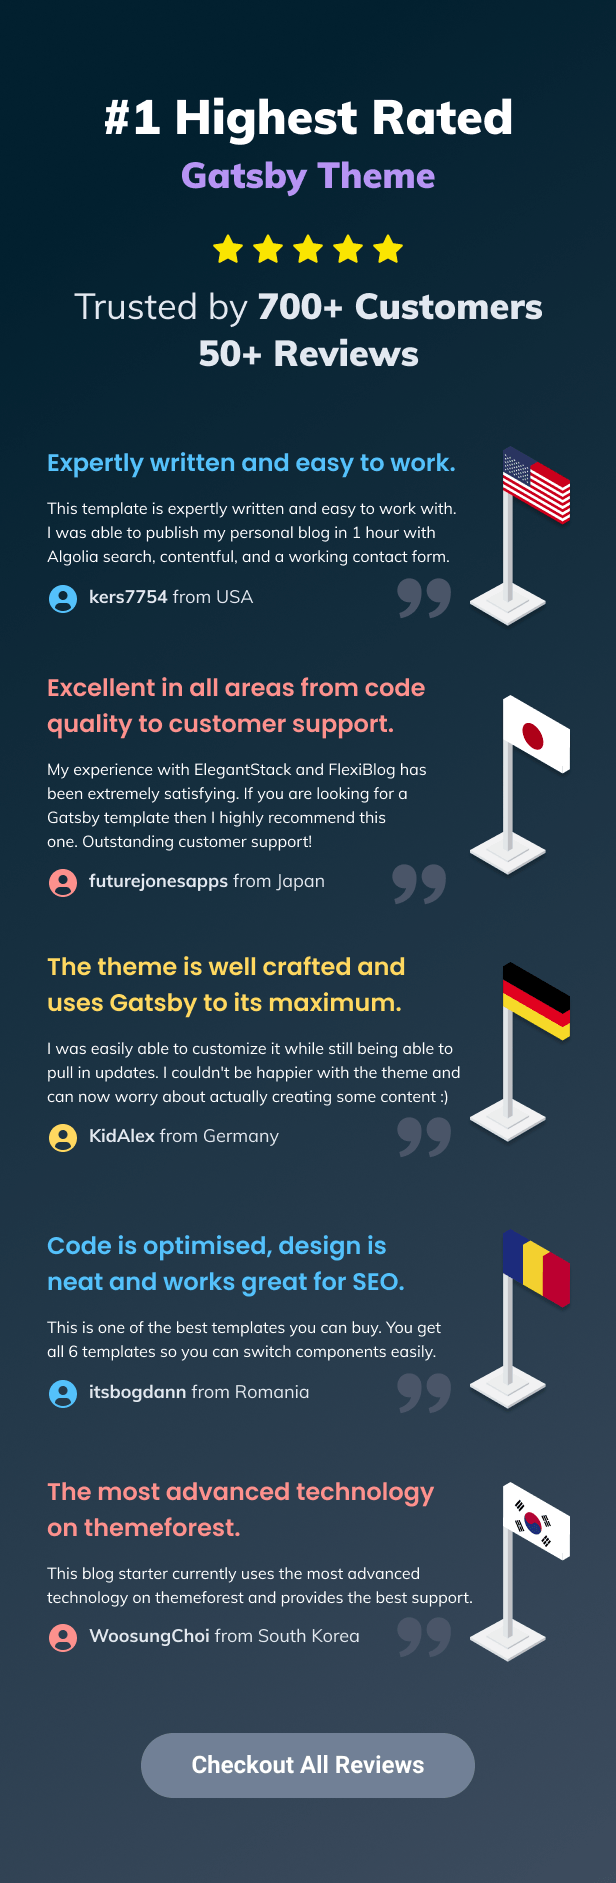 Gatsby Theme Support